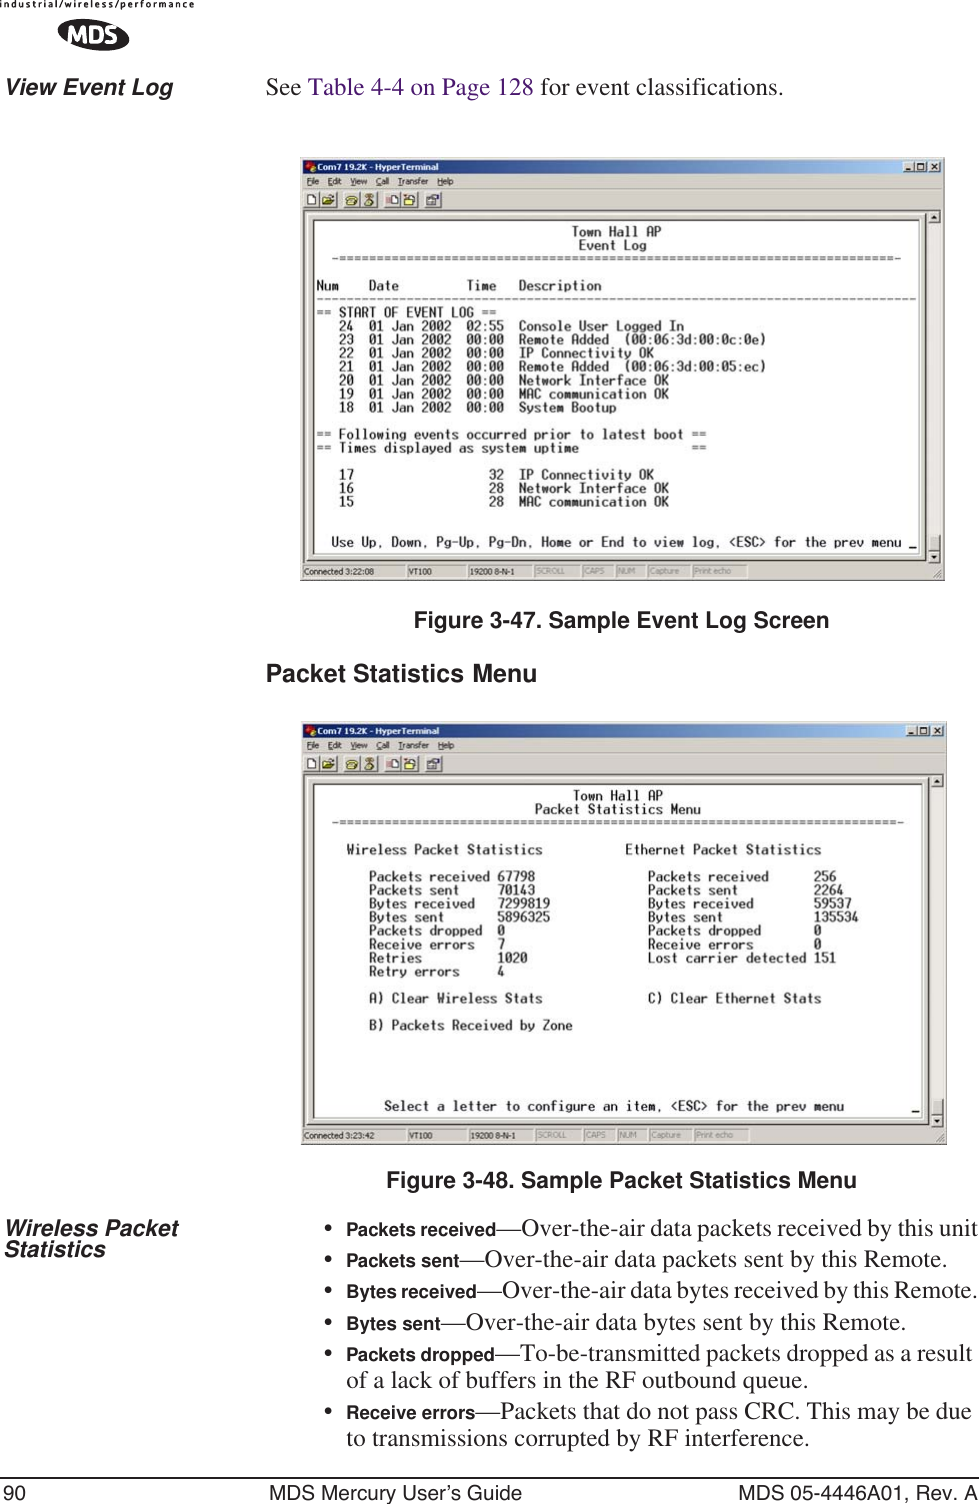 90 MDS Mercury User’s Guide MDS 05-4446A01, Rev. AView Event Log See Table 4-4 on Page 128 for event classifications.Figure 3-47. Sample Event Log ScreenPacket Statistics Menu Figure 3-48. Sample Packet Statistics MenuWireless Packet Statistics •Packets received—Over-the-air data packets received by this unit•Packets sent—Over-the-air data packets sent by this Remote.•Bytes received—Over-the-air data bytes received by this Remote.•Bytes sent—Over-the-air data bytes sent by this Remote.•Packets dropped—To-be-transmitted packets dropped as a result of a lack of buffers in the RF outbound queue.•Receive errors—Packets that do not pass CRC. This may be due to transmissions corrupted by RF interference.